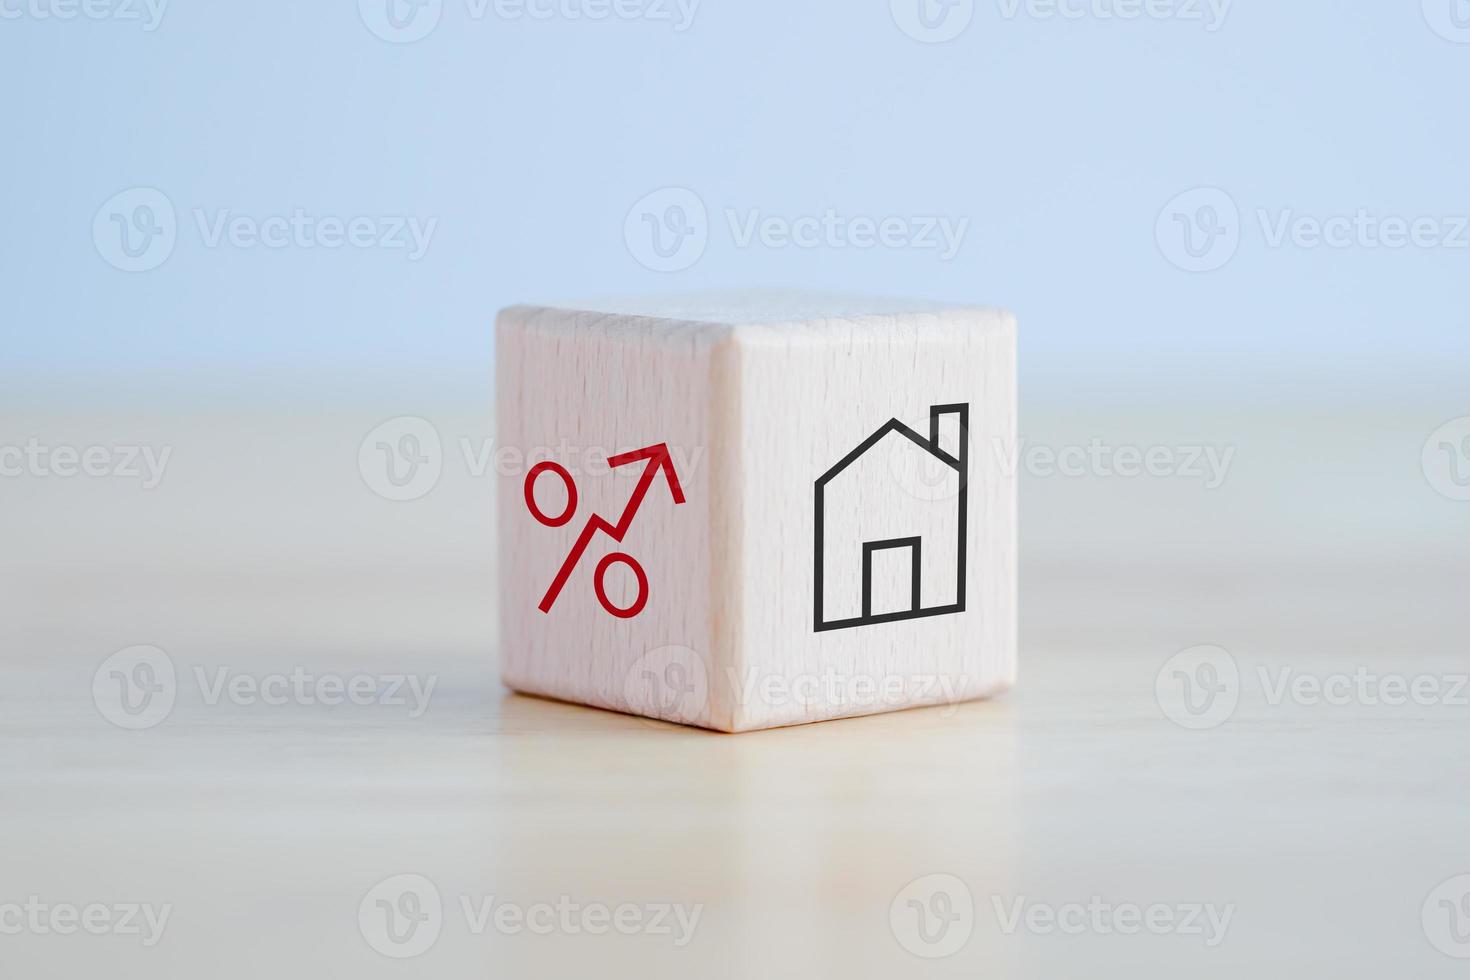 House and property investment and asset management concept. Loan, Mortgage, Inflation, Sale and tax rise. House icon and percentage sign on wooden block. Home price or increase of interest rate. photo